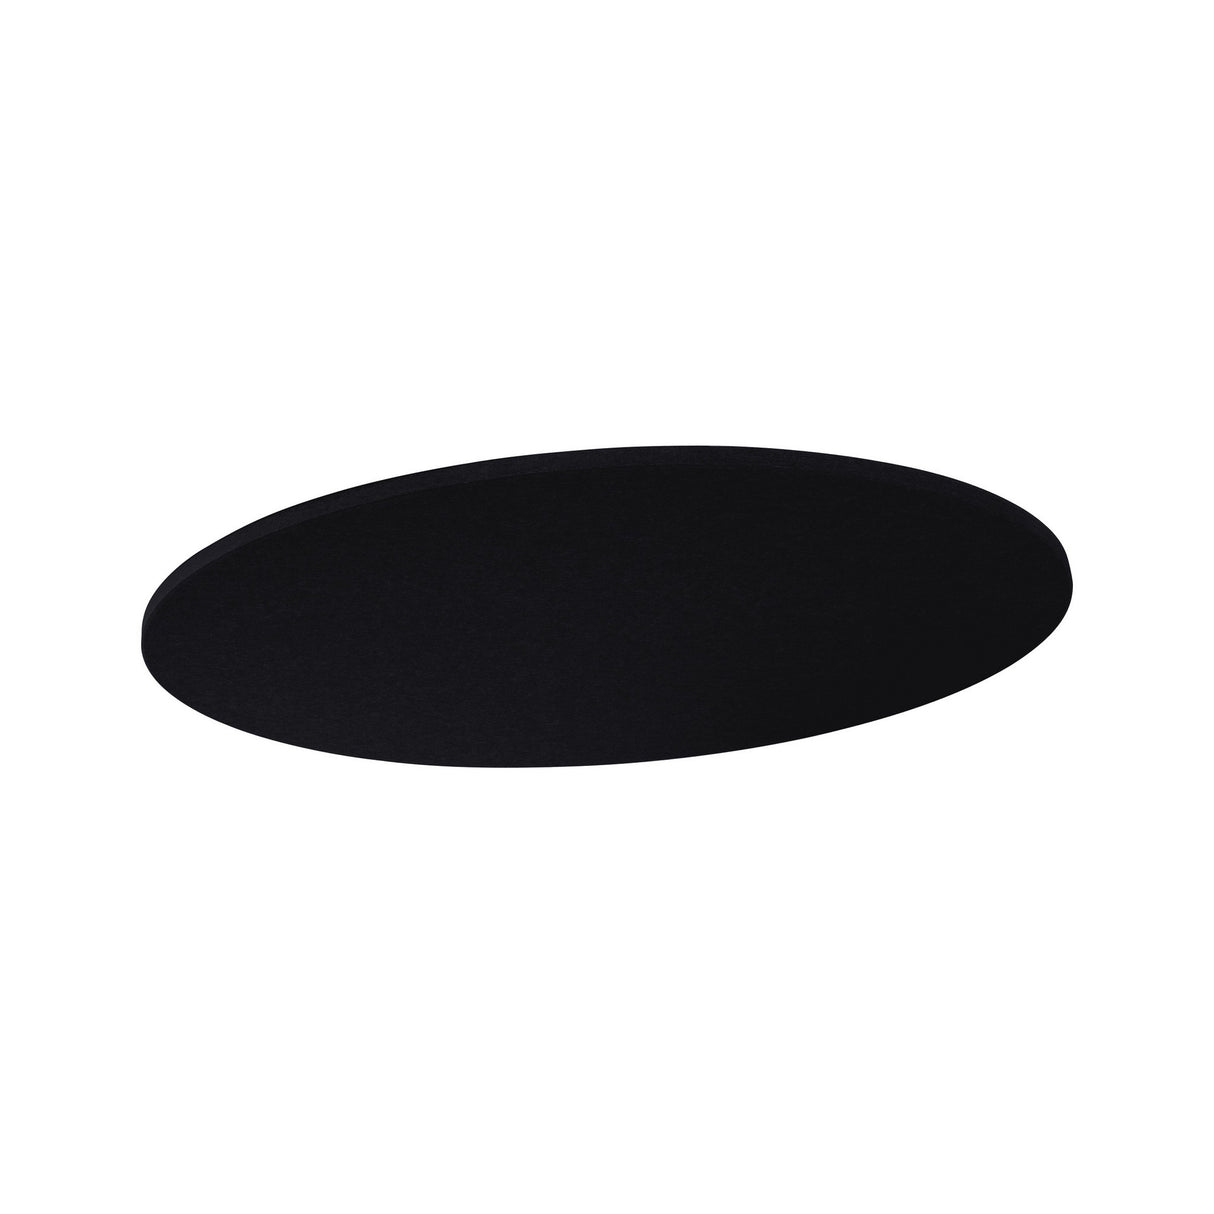 Primacoustic EcoScapes Round Cloud 4-Foot Micro-Beveled Edge Wall Panel, Onyx 2-Pack